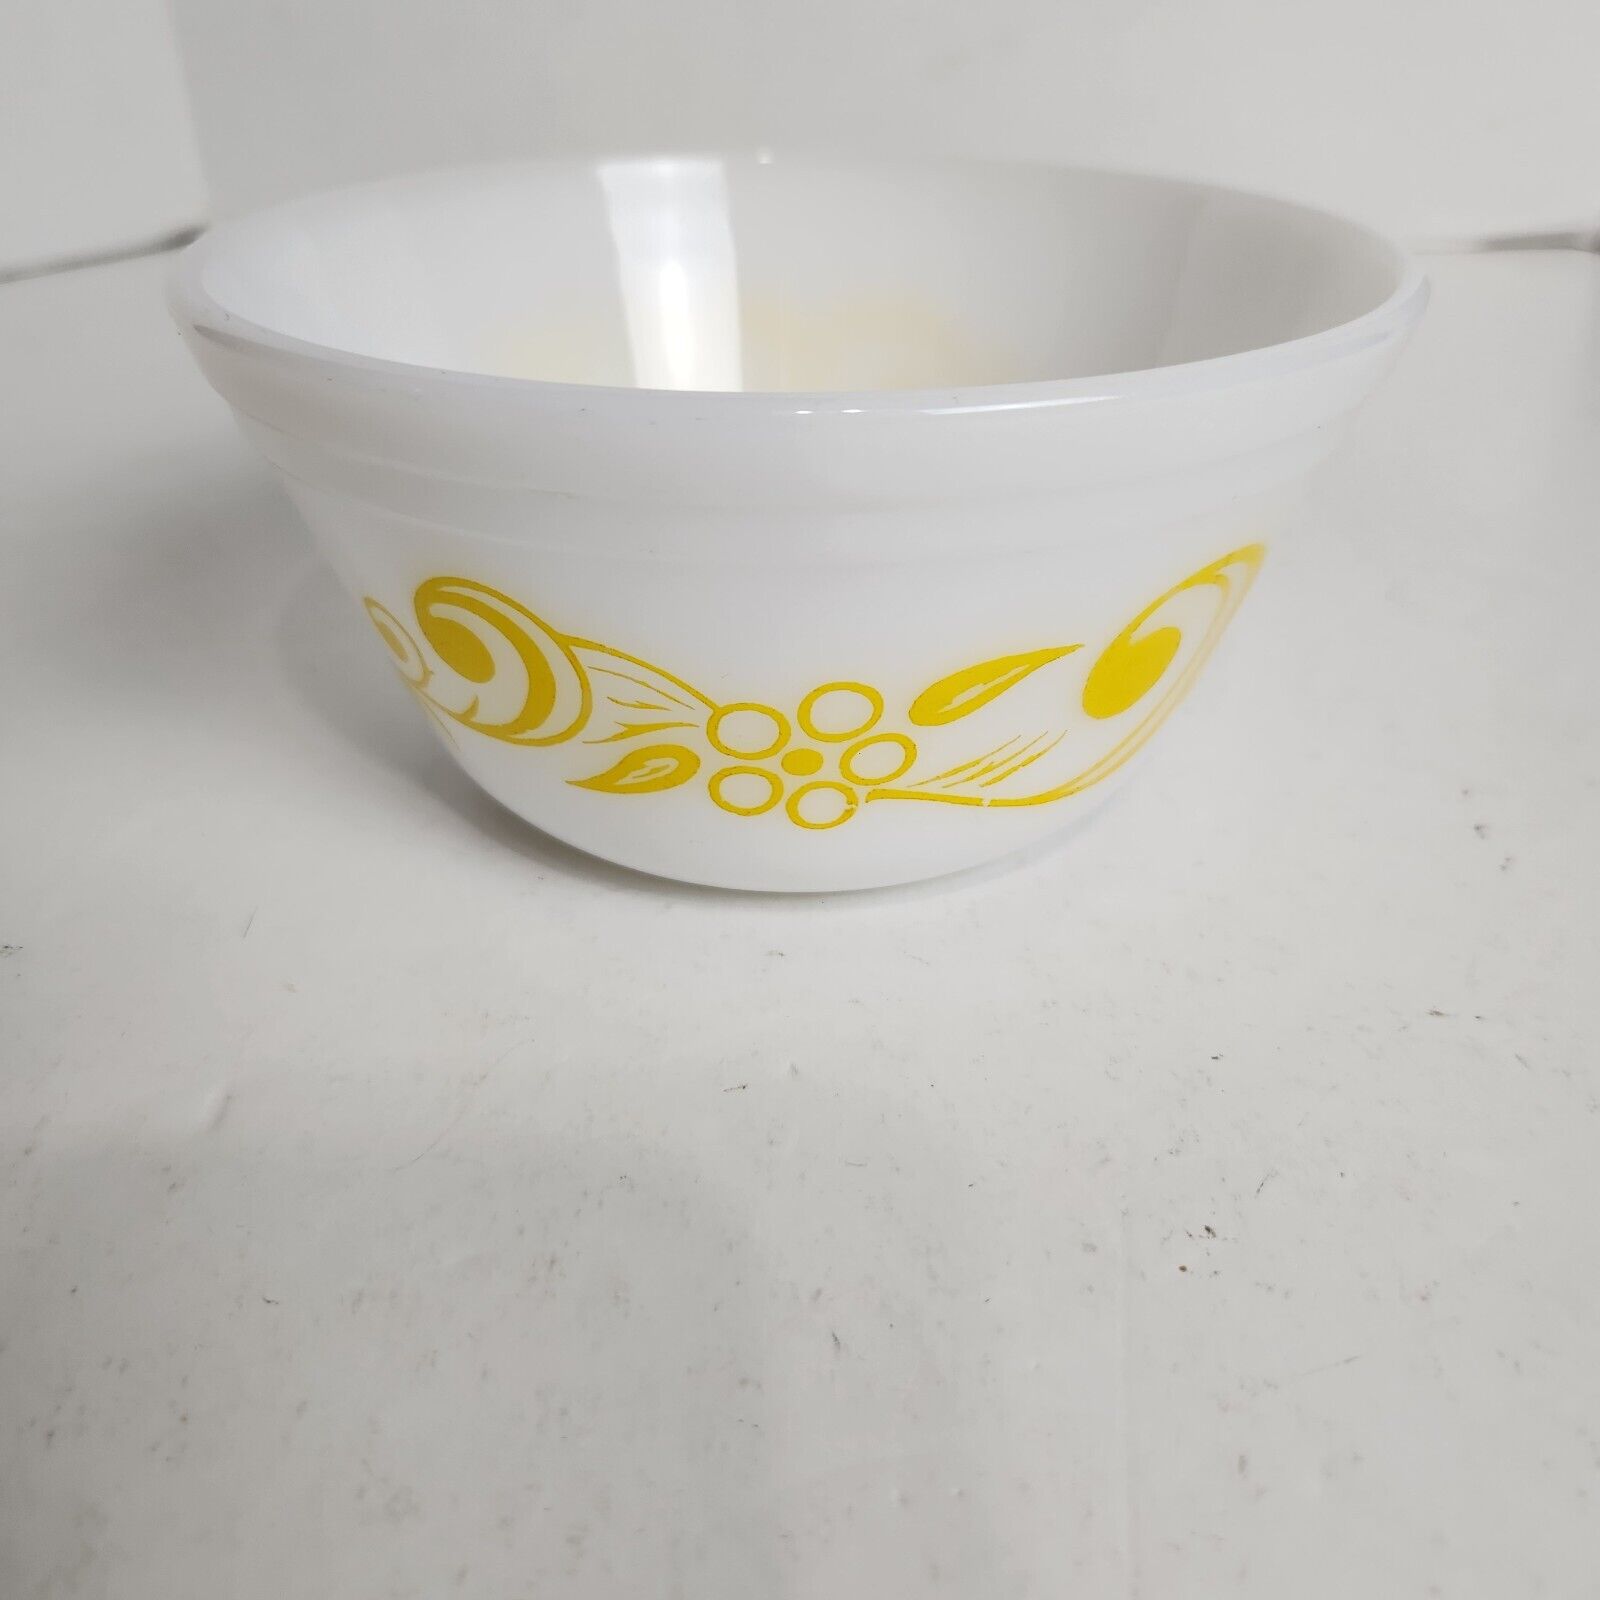 Vintage Federal Glass Milk Glass Oven Ware Nesting Mixing Bowl 6